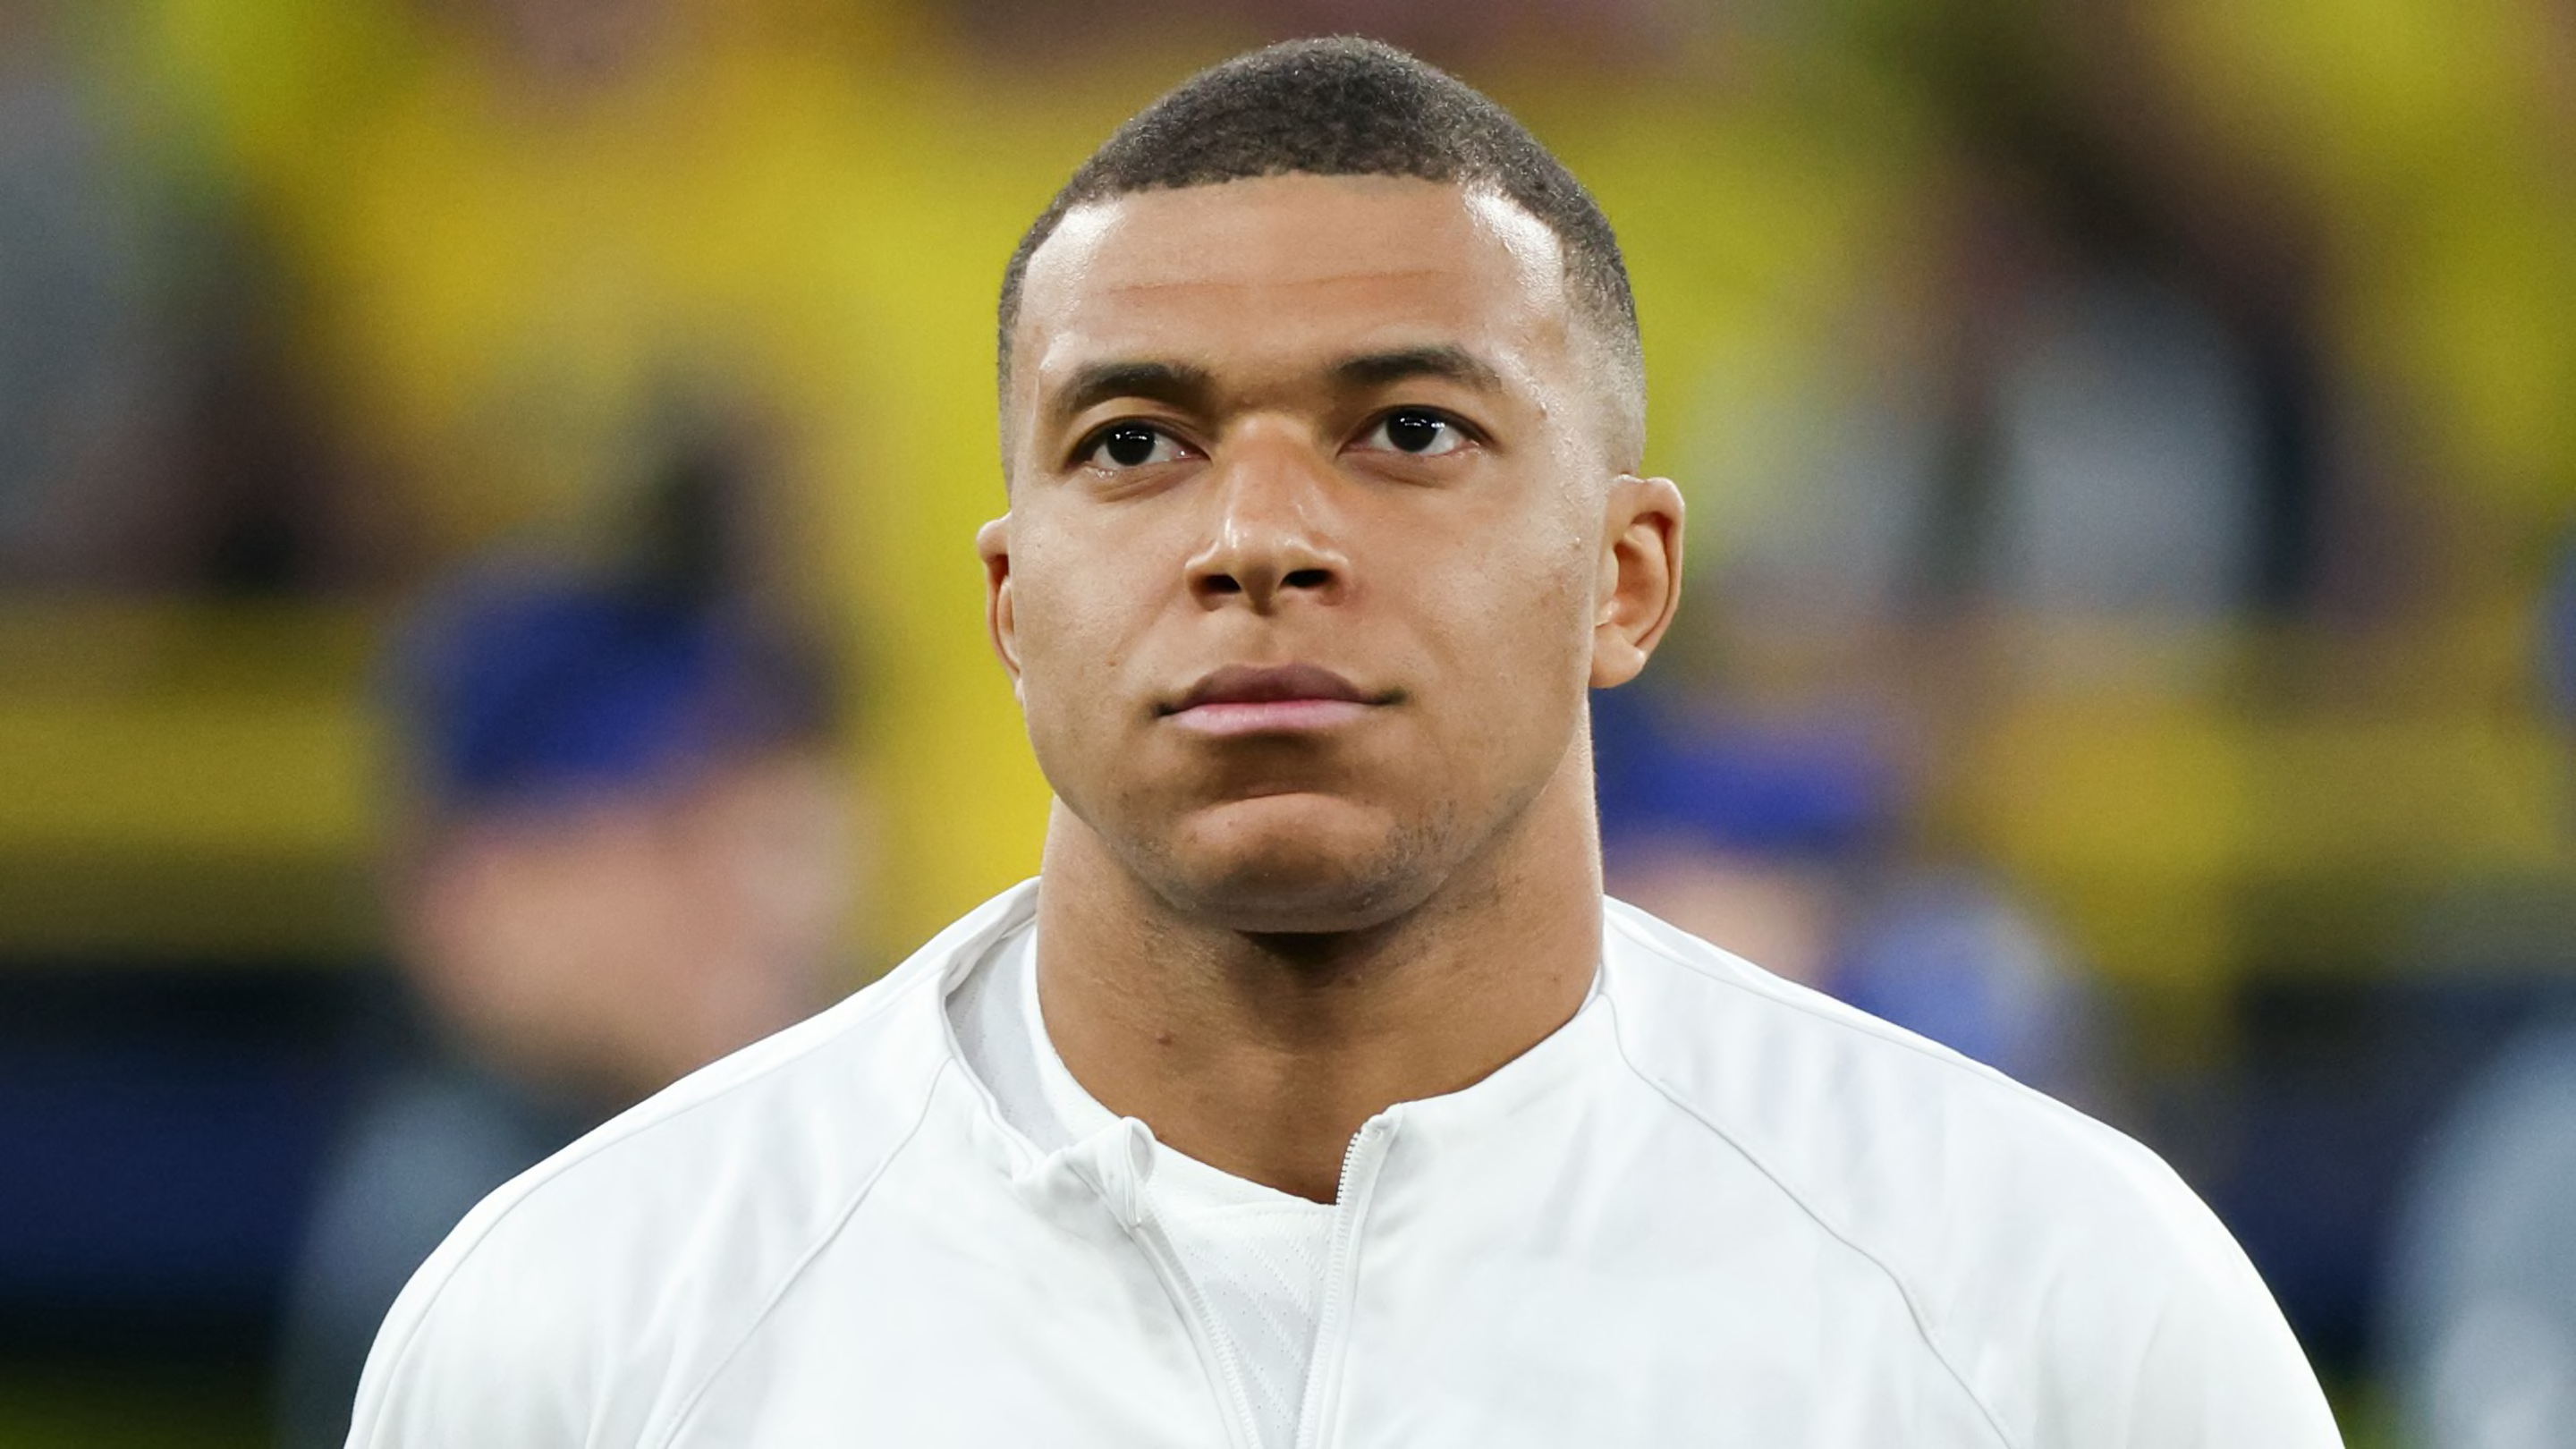 Kylian Mbappe's Real Madrid contract 'revealed' ahead of summer transfer